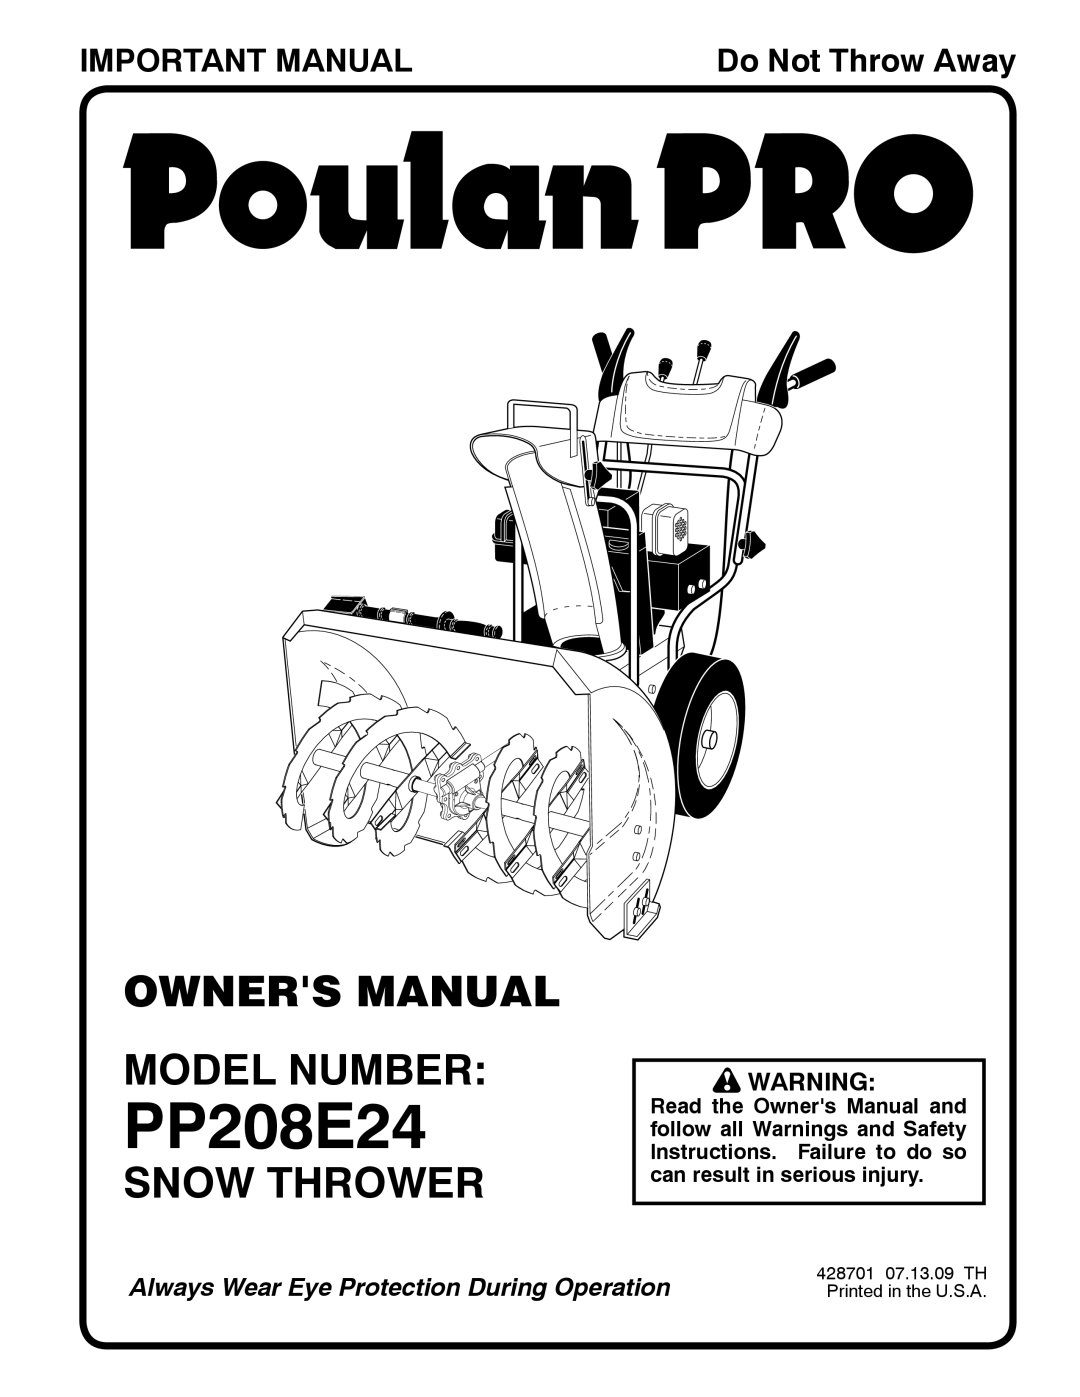 Poulan 96198002601, 428701 owner manual Snow Thrower, Important Manual, PP208E24, Do Not Throw Away 